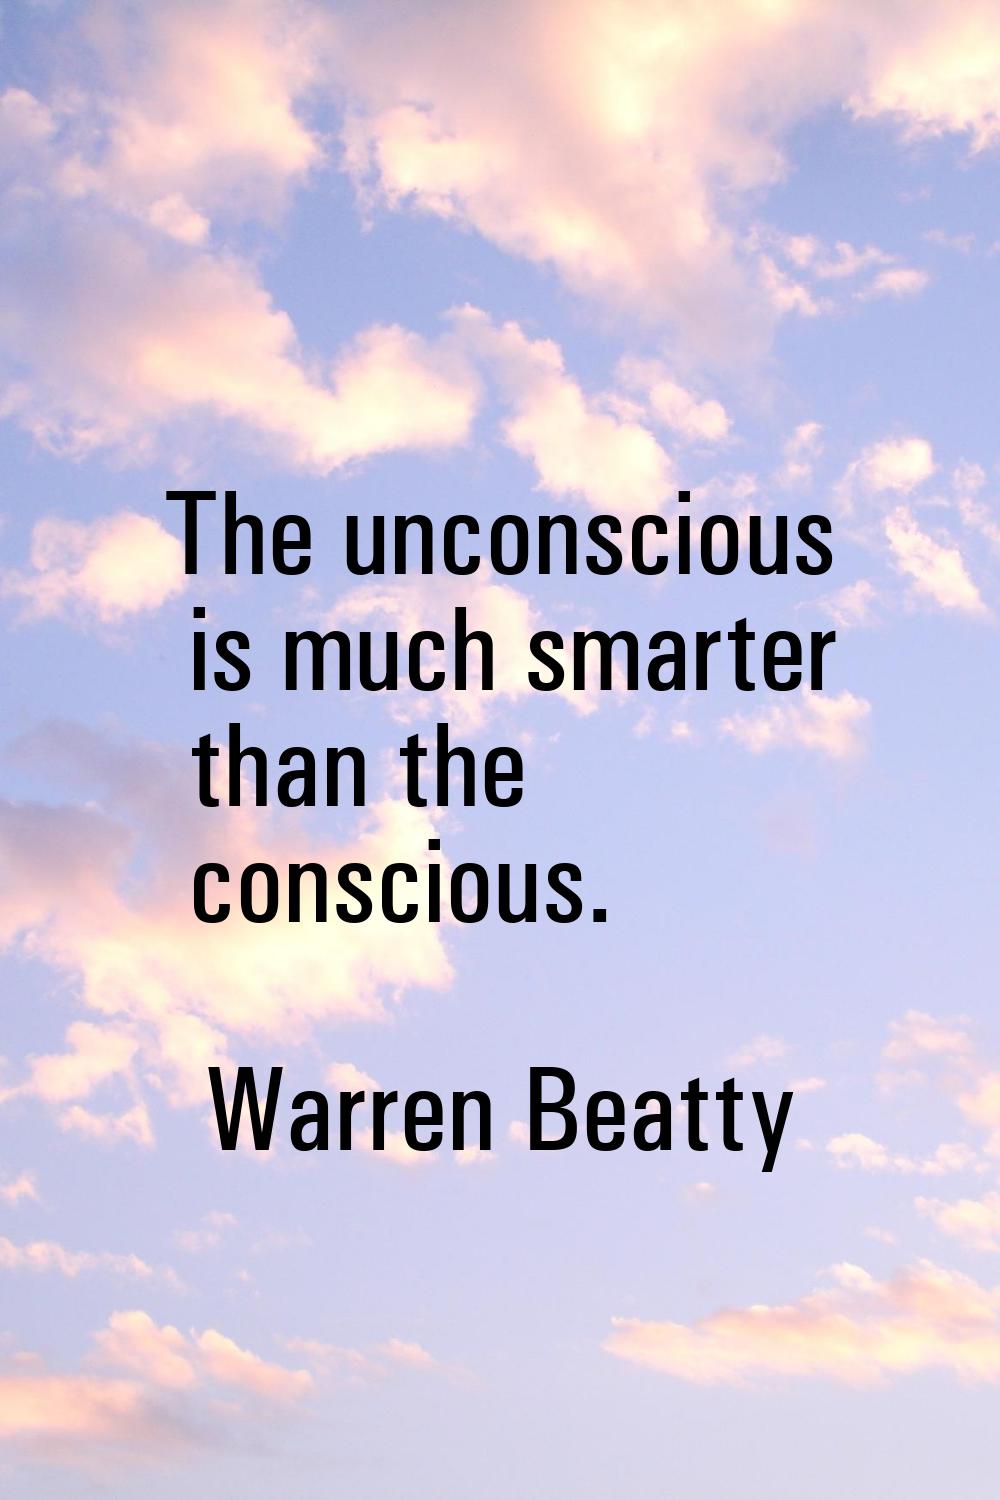 The unconscious is much smarter than the conscious.